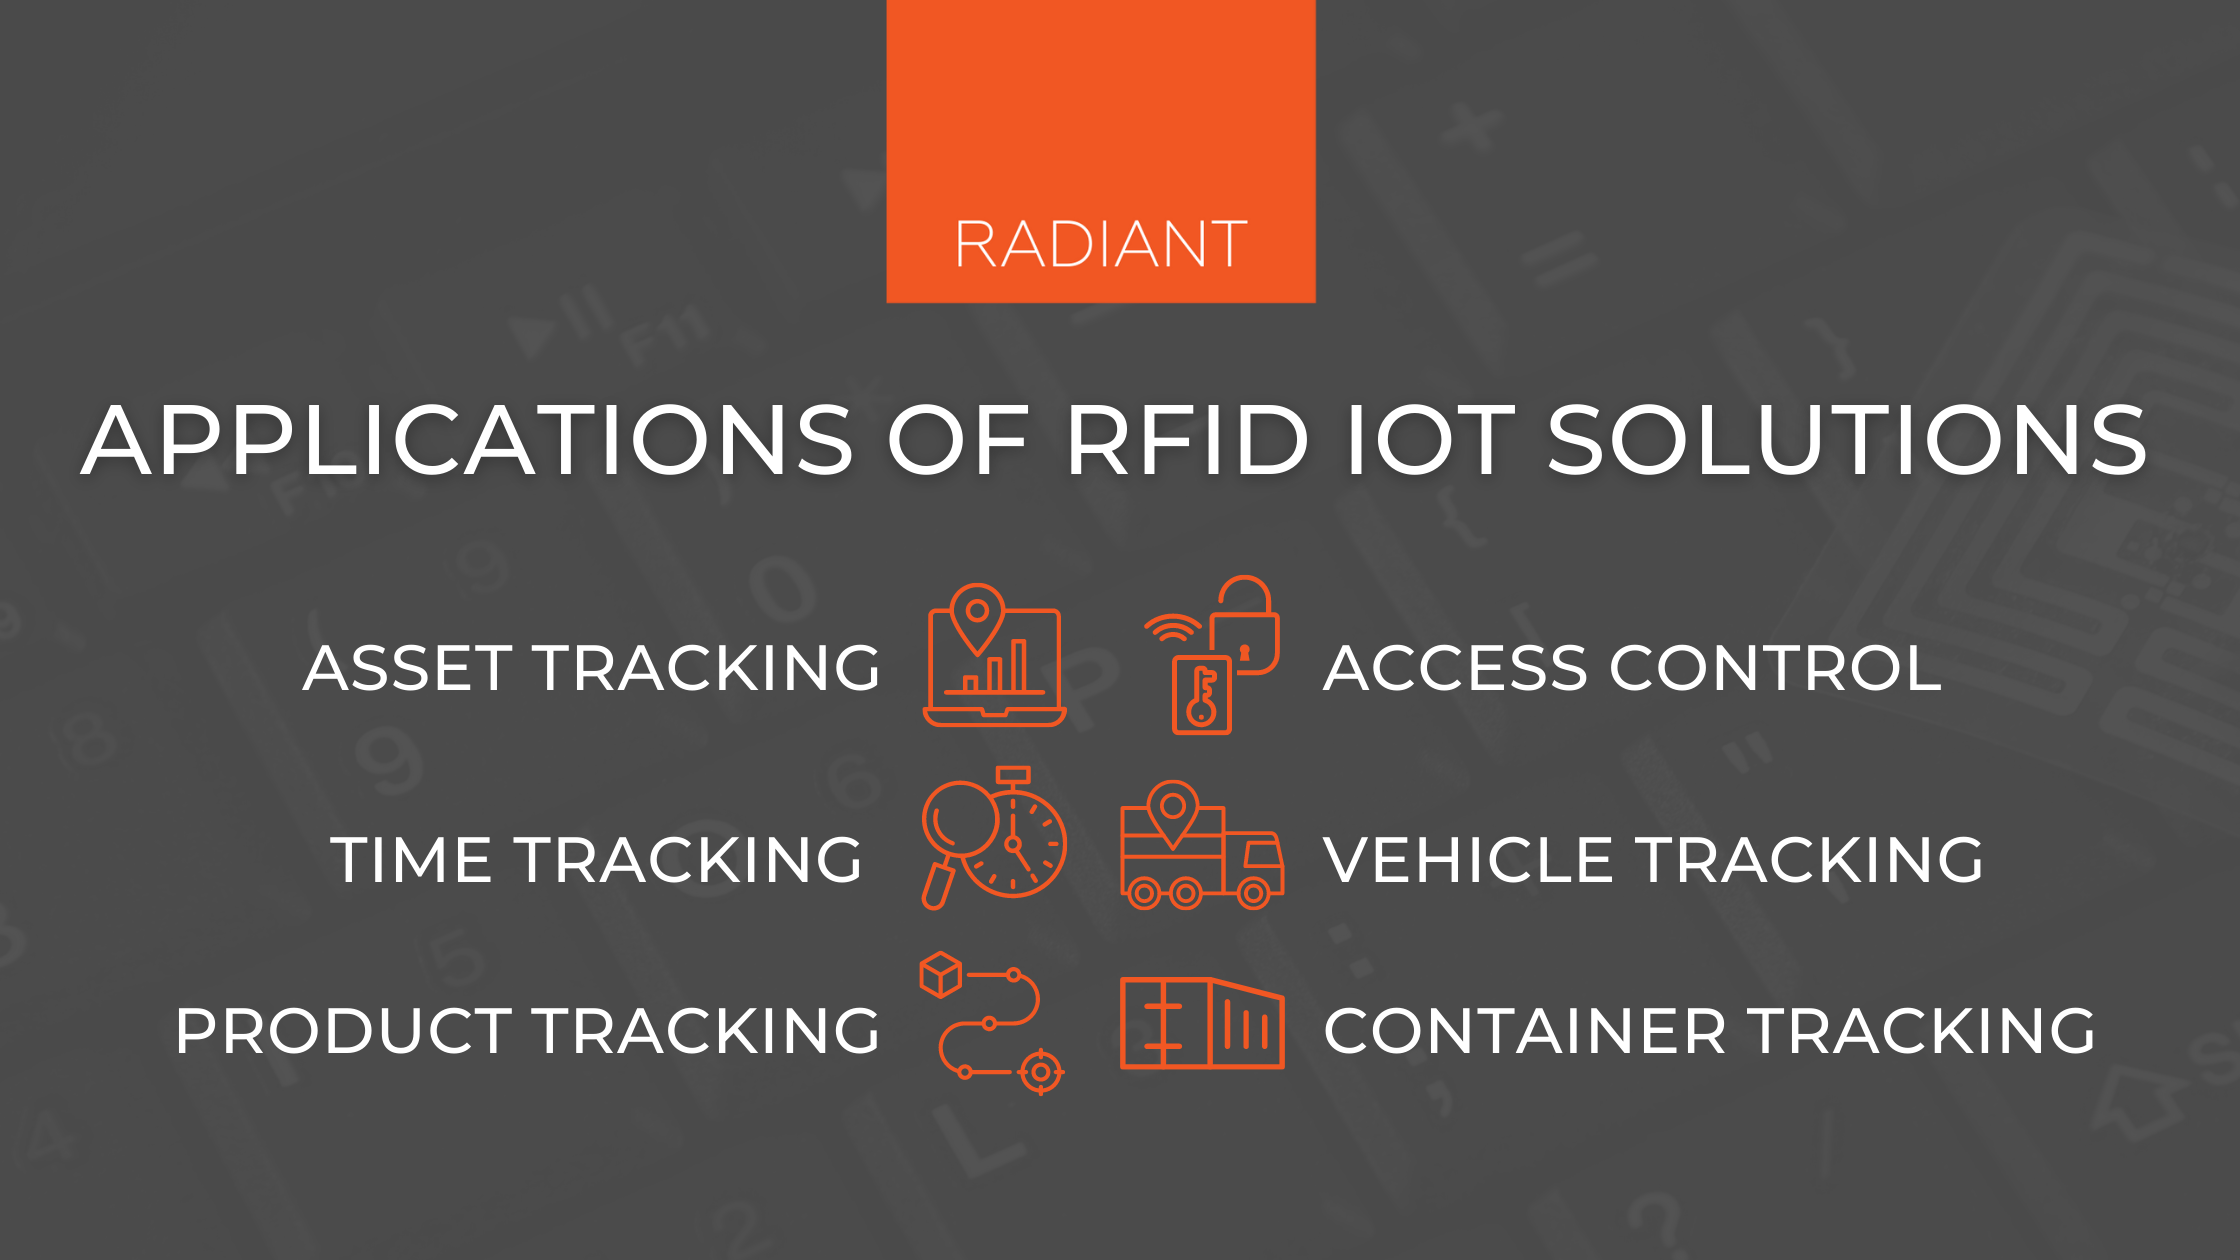 Applications Of RFID IoT Solutions - RFID Use Cases - RFID IoT Solutions - RFID Technology In IoT - RFID And IoT Solutions - RFID Asset Tracking - IoT Asset Tracking - RFID Asset Tracking Solutions - IoT Asset Tracking Solutions - RFID Asset Tracking System - IoT Asset Tracking System - Barcode RFID IoT Solutions - RFID Asset Tracking Solution - IoT Asset Tracking Solution - RFID Technology - IoT Solutions - Internet of Things Solutions